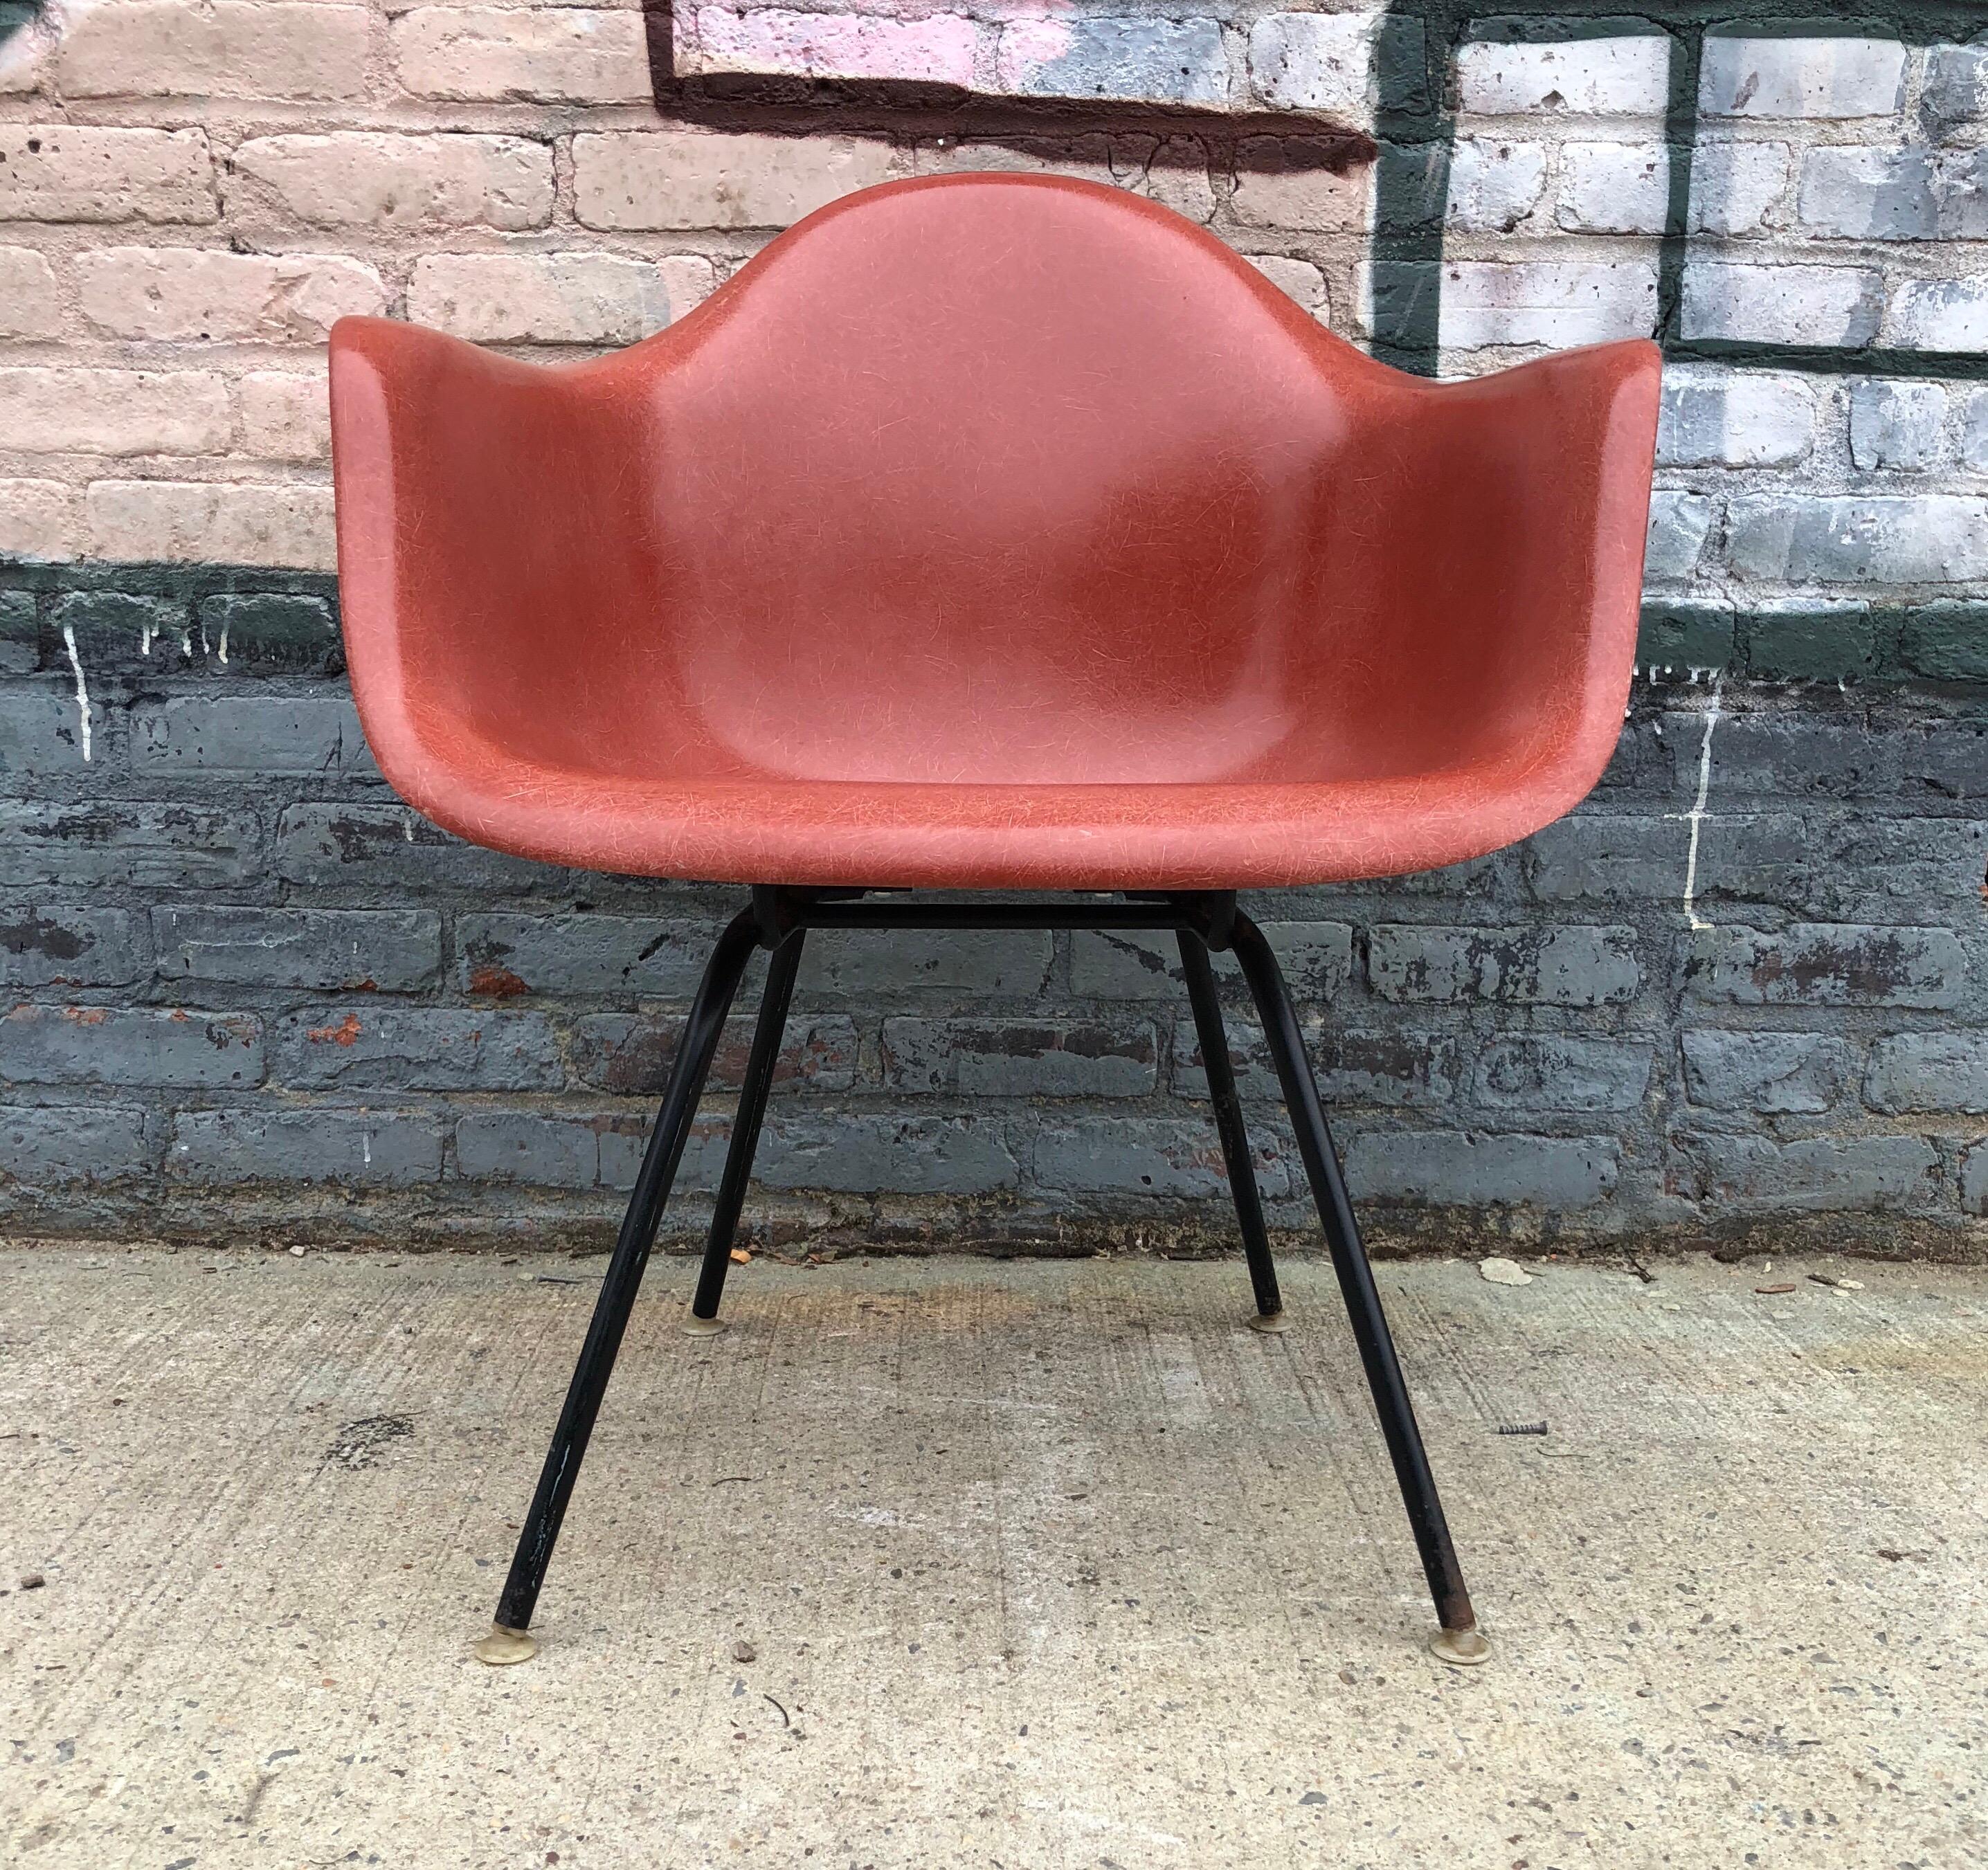 Herman Miller Eames Armshell in terra cotta. In excellent vintage condition. No cracks. On lounge base but can be hanged for dining height base at no charge. Rocker or Eiffel bases available for additional cost. Signed. From 1970s.